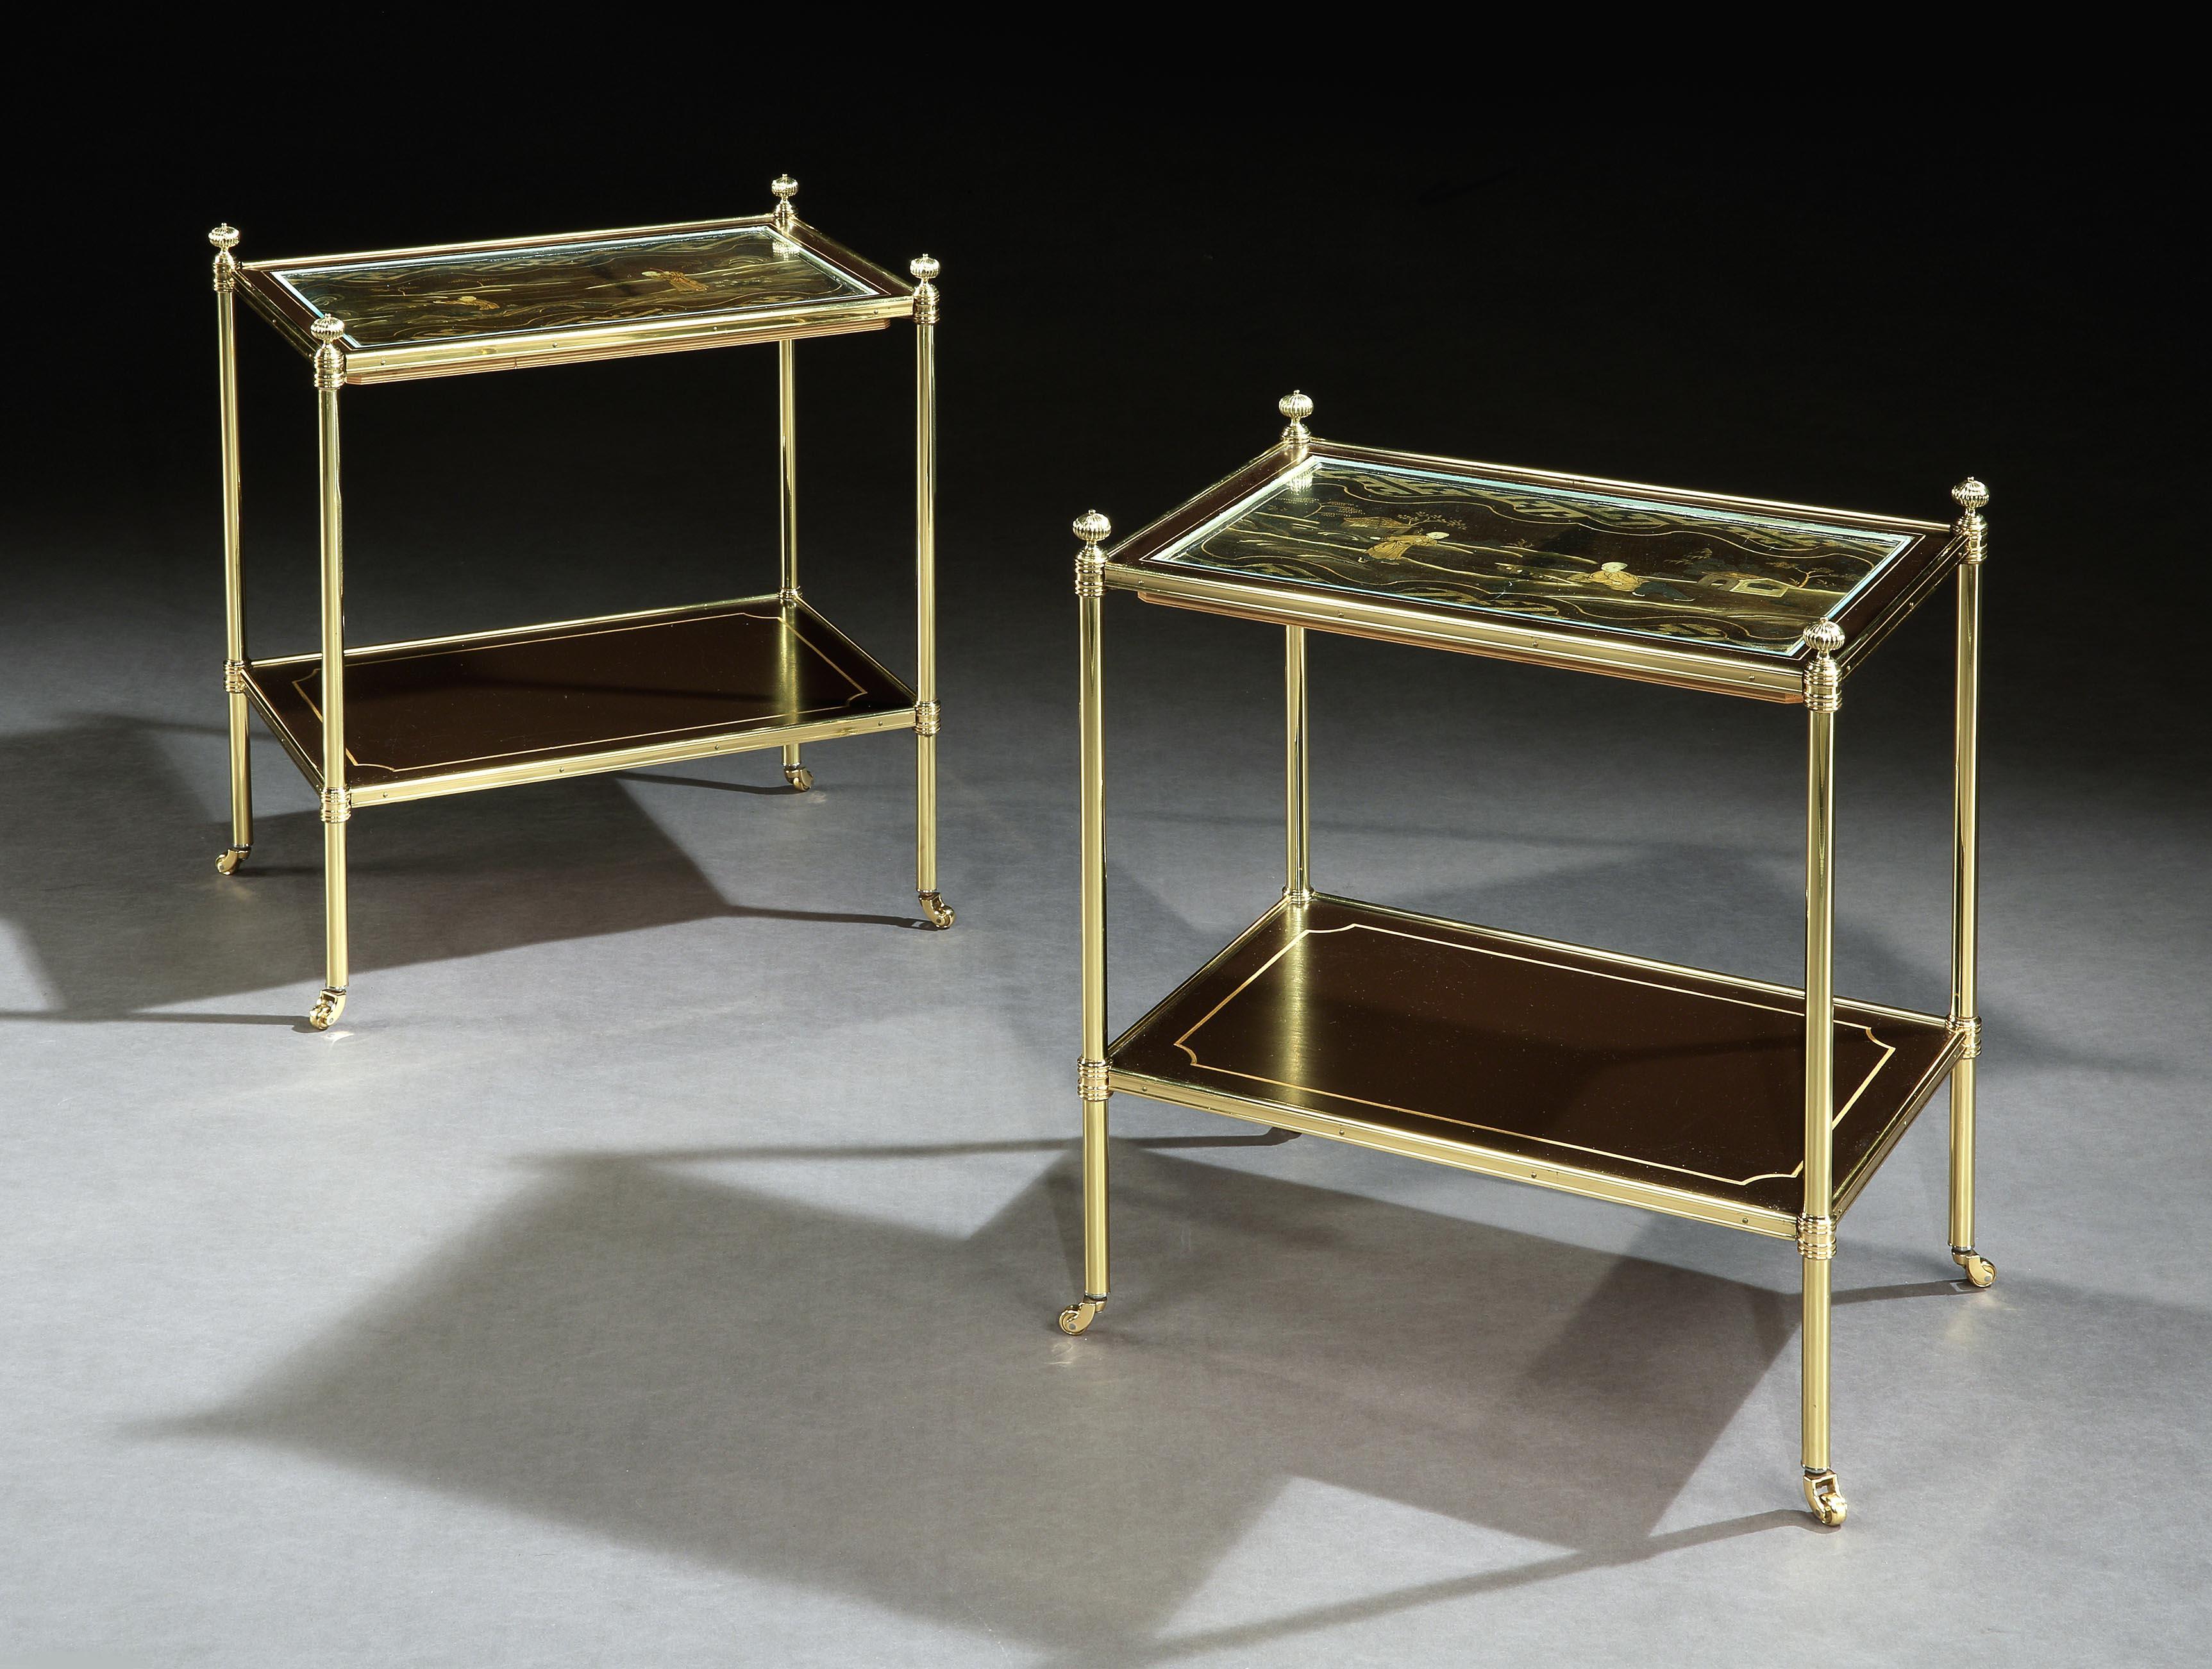 19th Century Pair of Chinese Black and Gilt Lacquer Two-Tier Tables